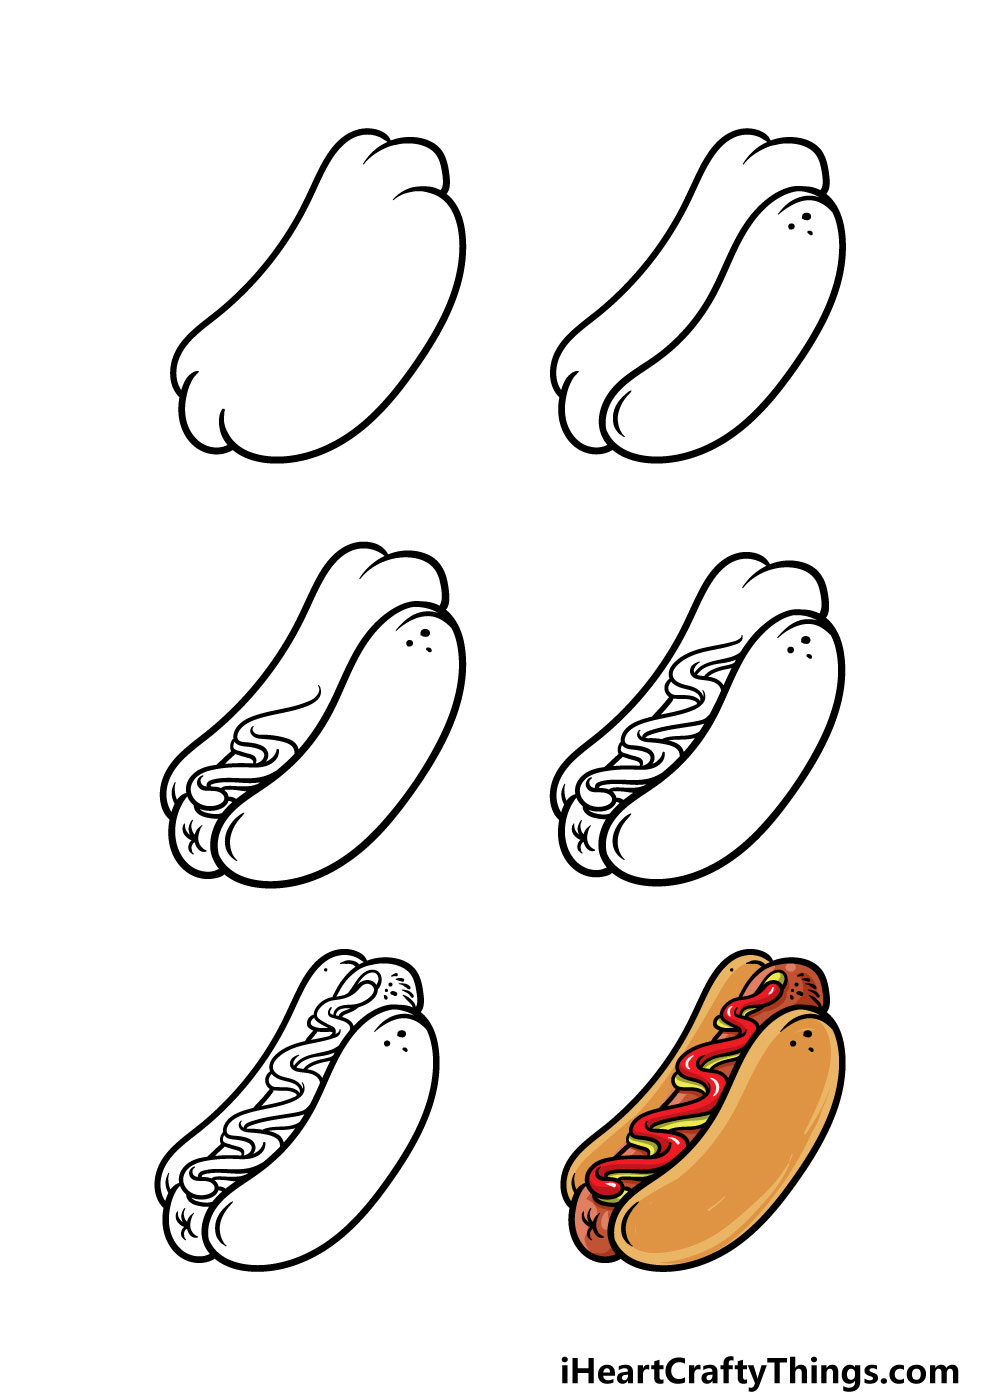 how to draw a hotdog in 6 steps